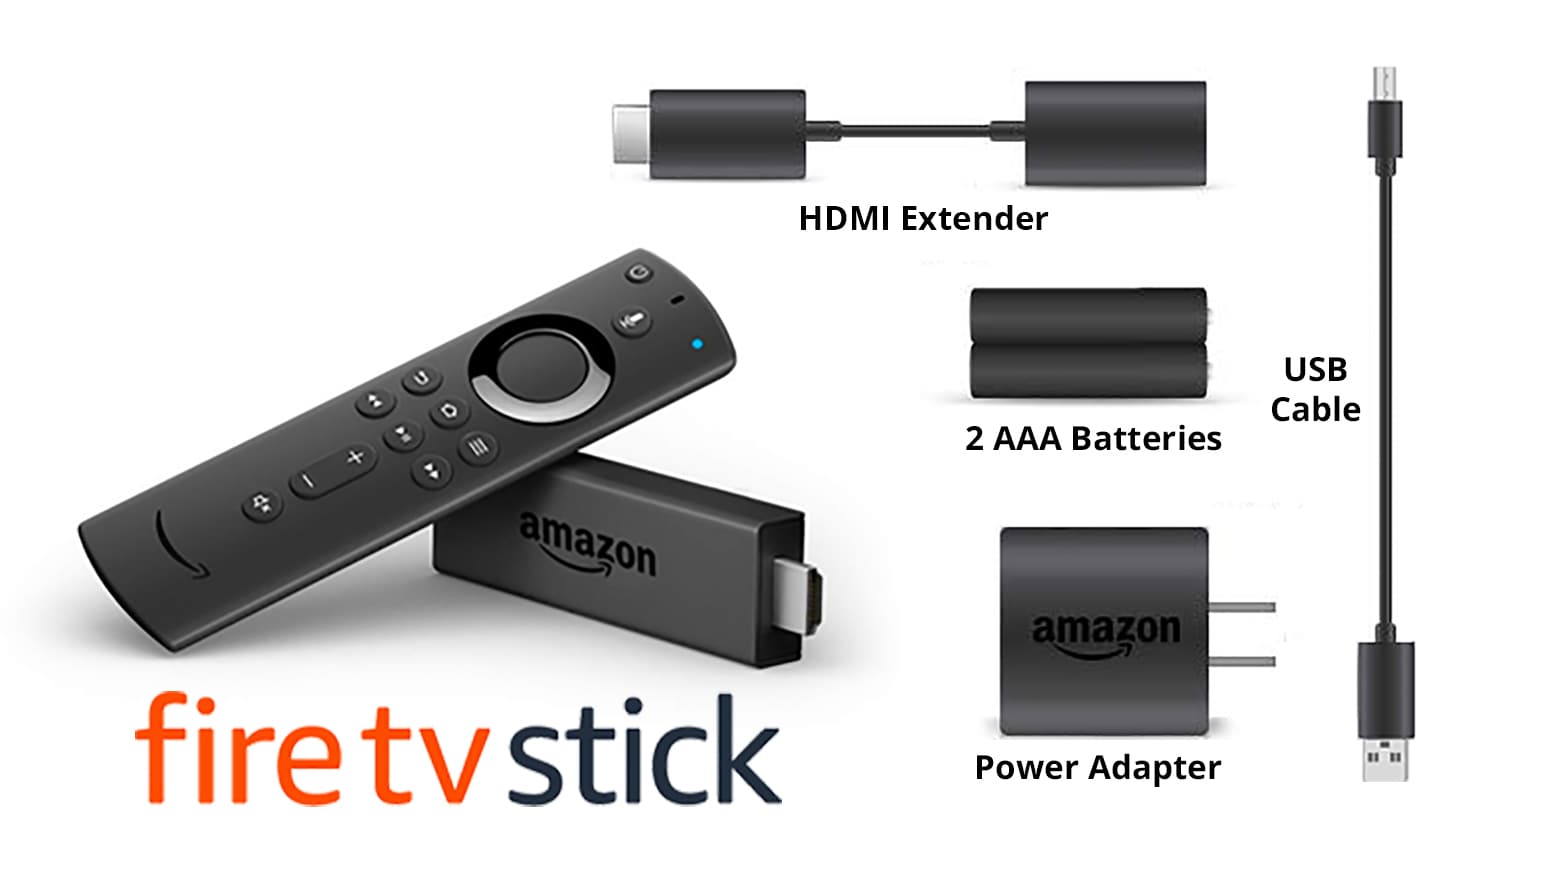 Plug, Connect & View - Installation Process for Amazon Fire TV Stick